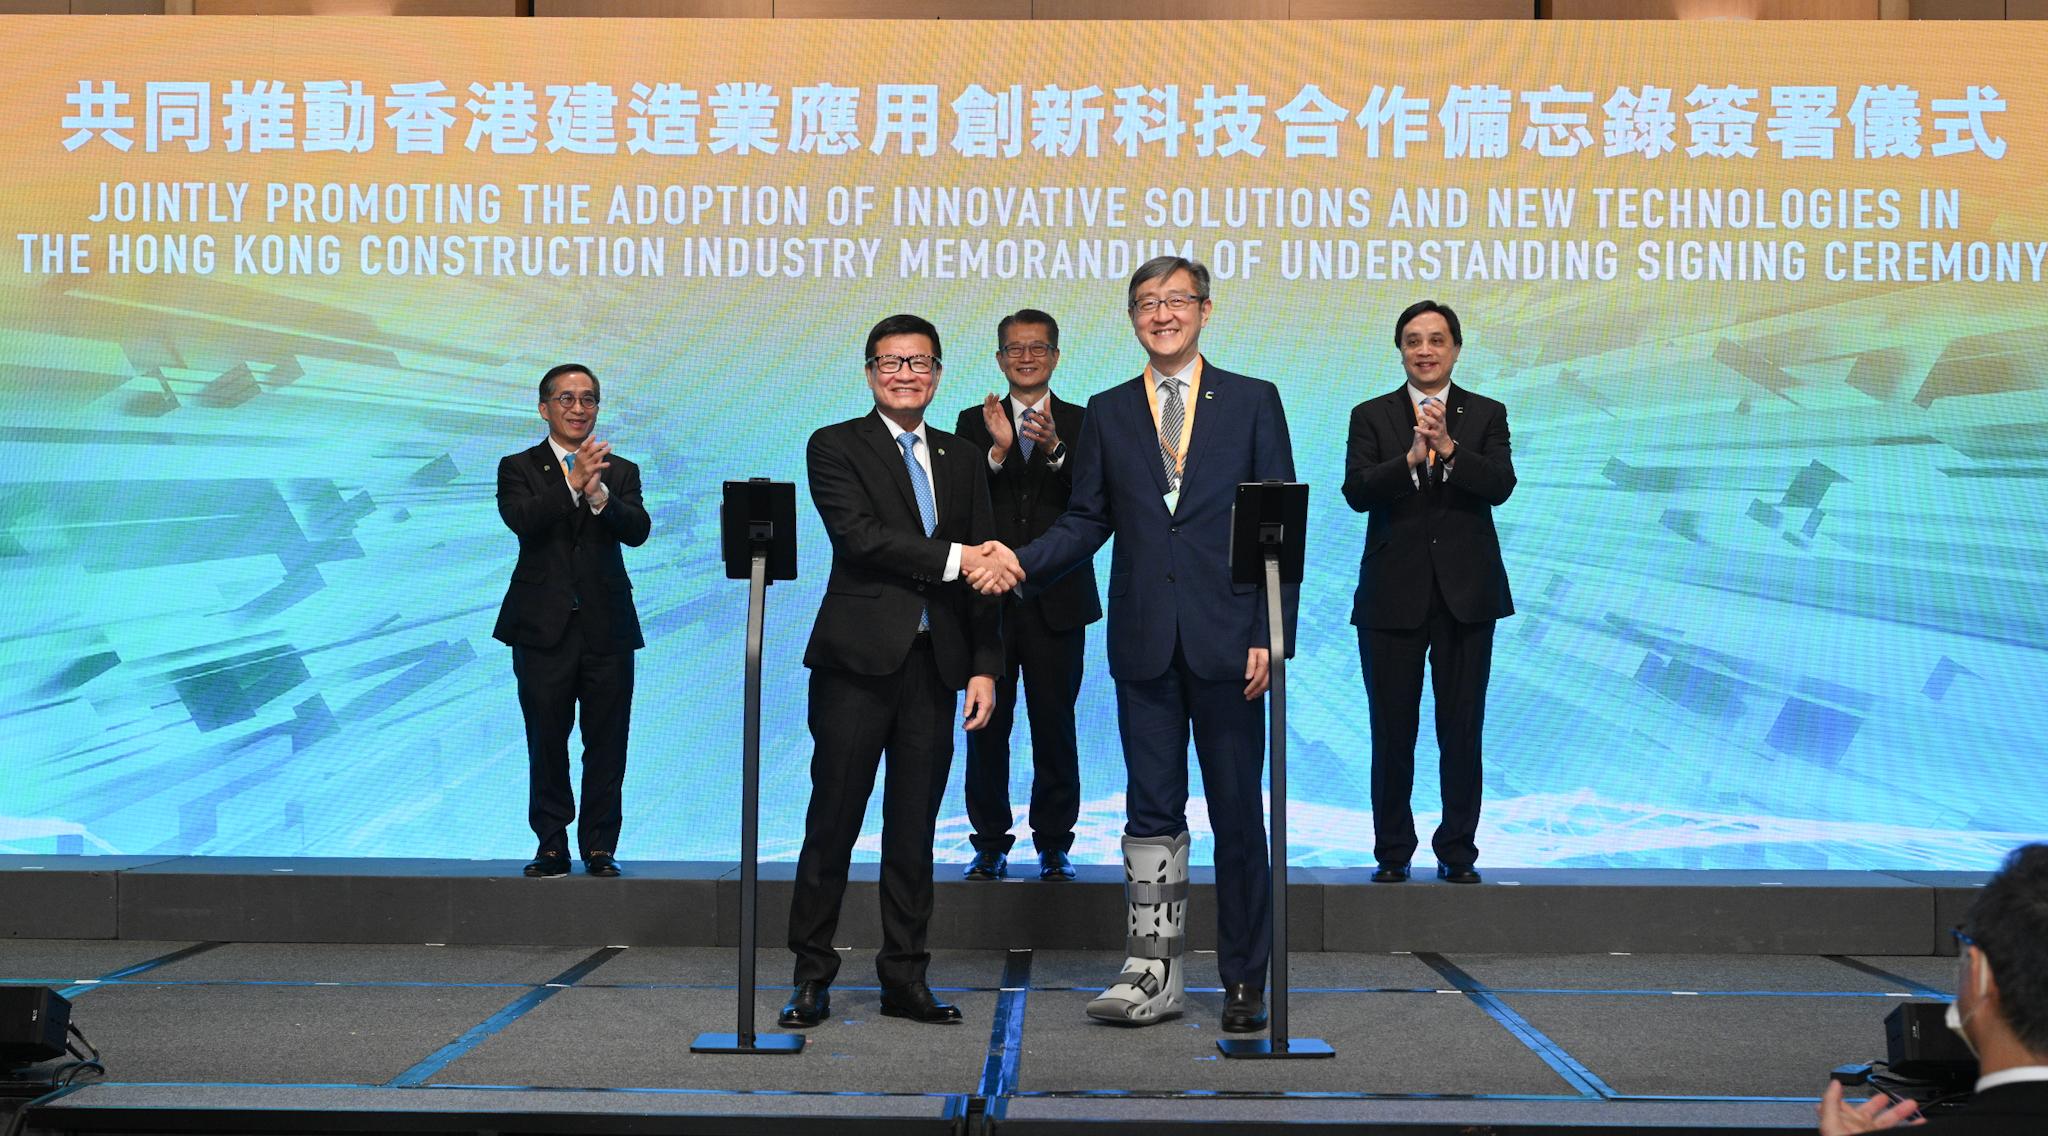 The Financial Secretary, Mr Paul Chan, attended the Global Construction Summit and CIC Construction Innovation Award 2022 Presentation Ceremony today (December 13). Photo shows (back row, from left) the Chairman of the Construction Industry Council (CIC), Mr Thomas Ho; Mr Chan; and the Chairman of the Board of Directors of Hong Kong Cyberport Management Company Limited (HKCMCL), Mr Simon Chan, witnessing the signing of a memorandum of understanding by (front row, from left) the Executive Director of the CIC, Mr Albert Cheng; and the Chief Executive Officer of HKCMCL, Mr Peter Yan. 
